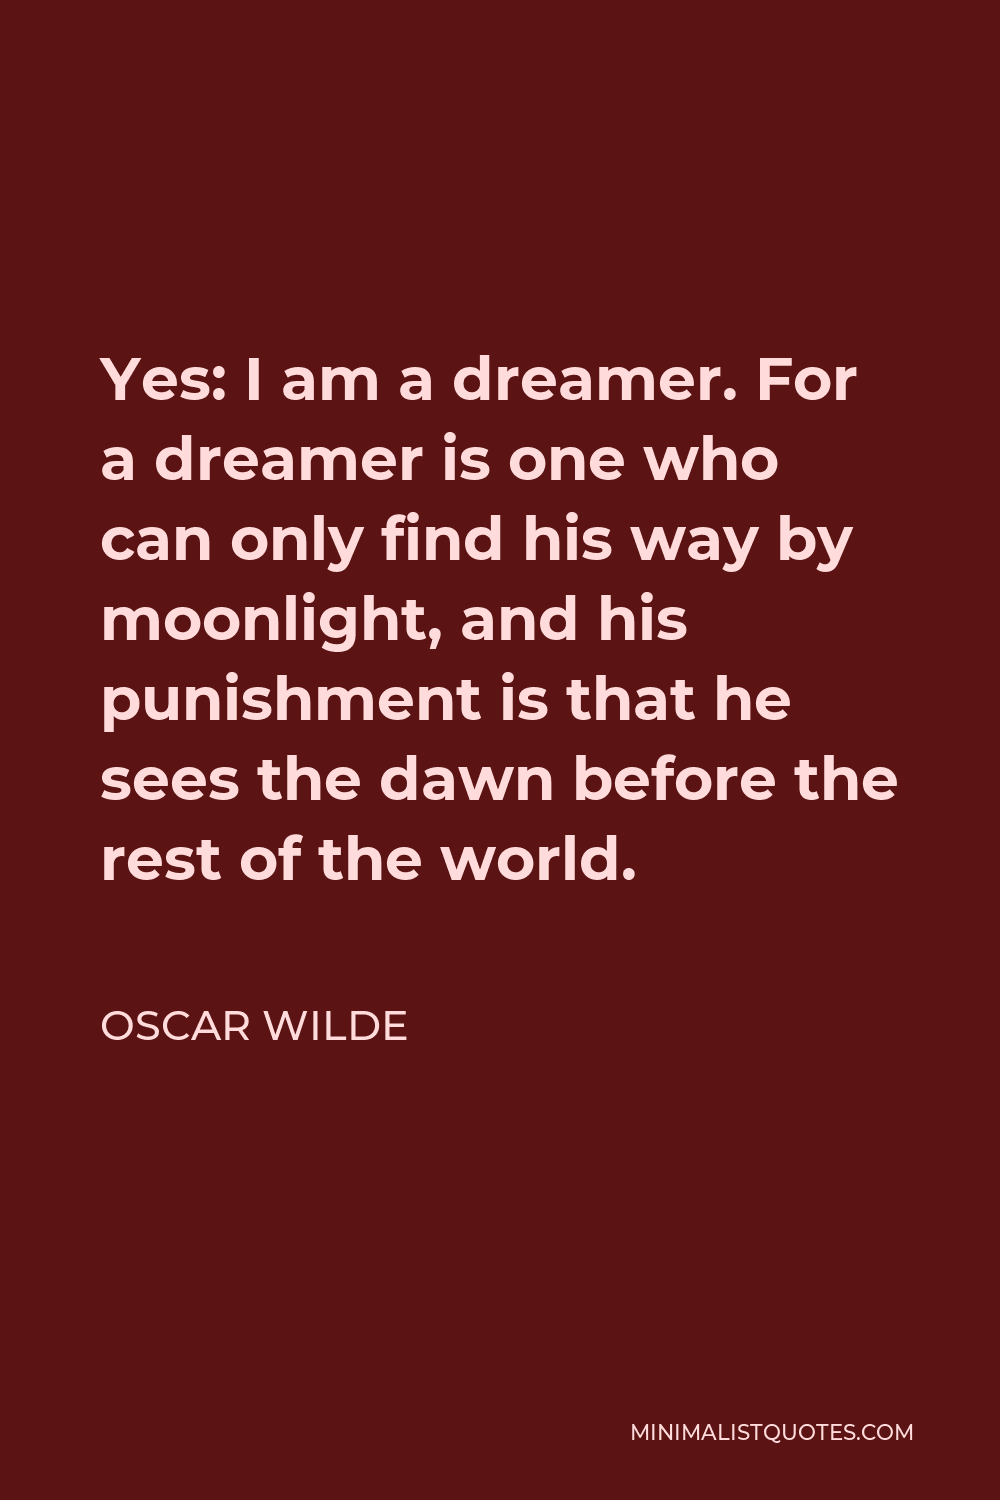 Oscar Wilde Quote - Yes: I am a dreamer. For a dreamer is one who can only find his way by moonlight, and his punishment is that he sees the dawn before the rest of the world.